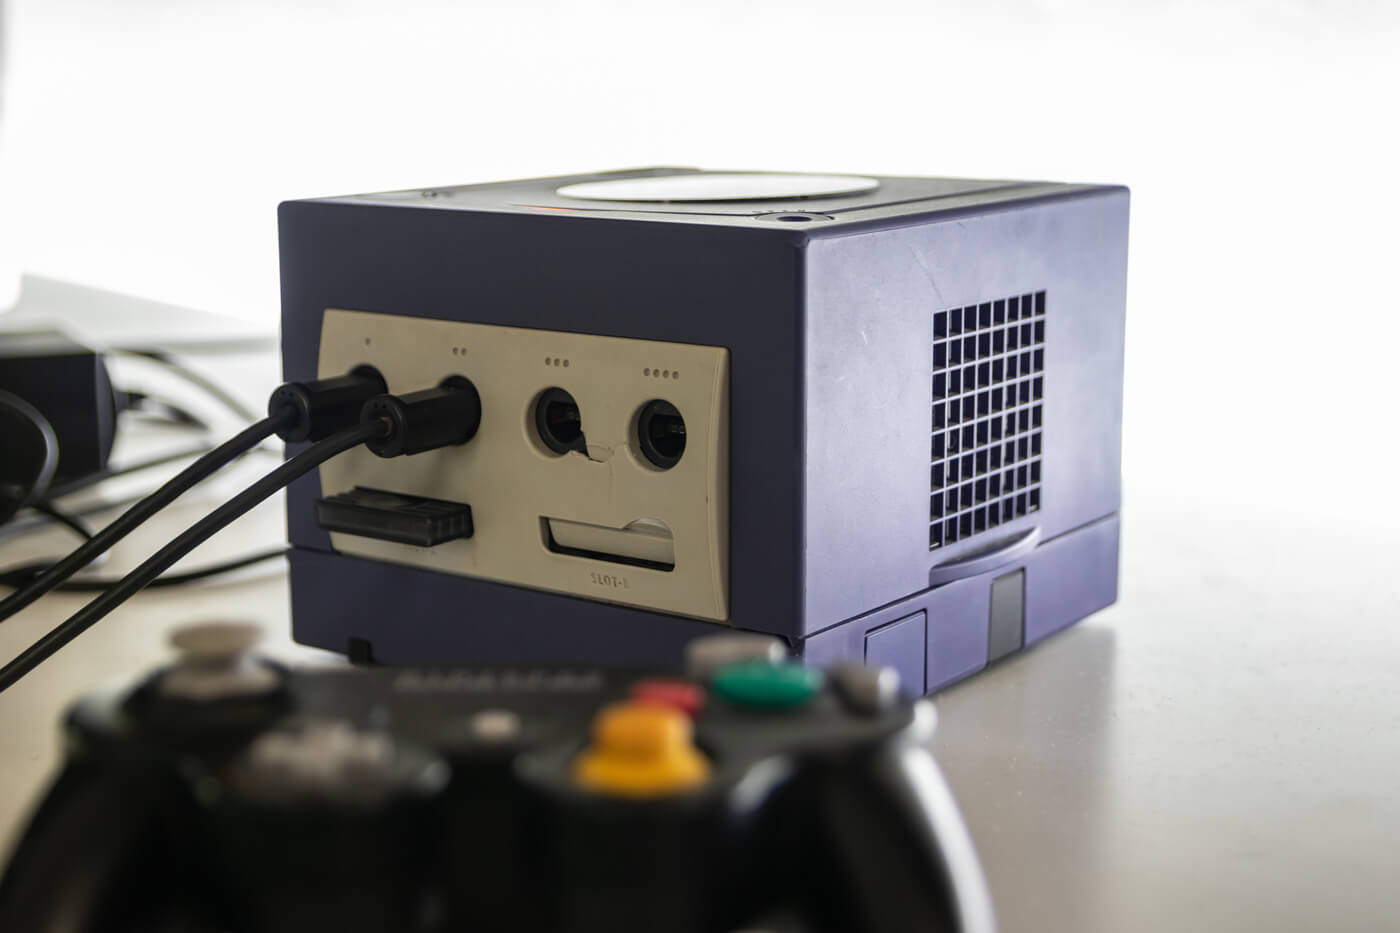 Modder builds AMD-powered gaming PC inside an old GameCube